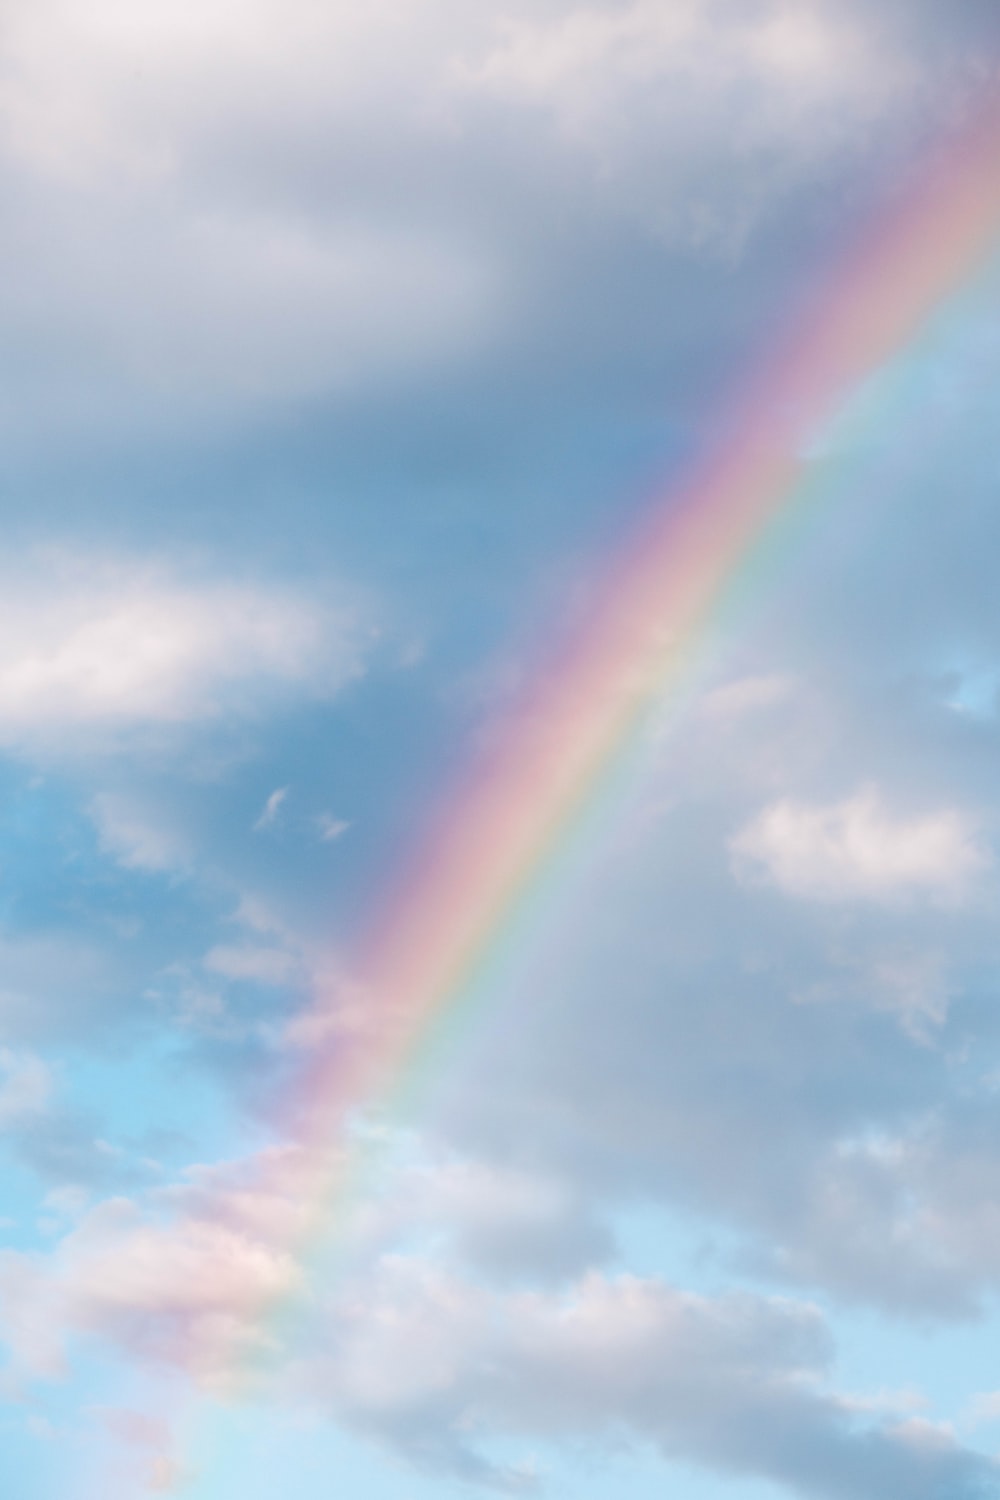 Rainbow Sky Picture. Download Free Image